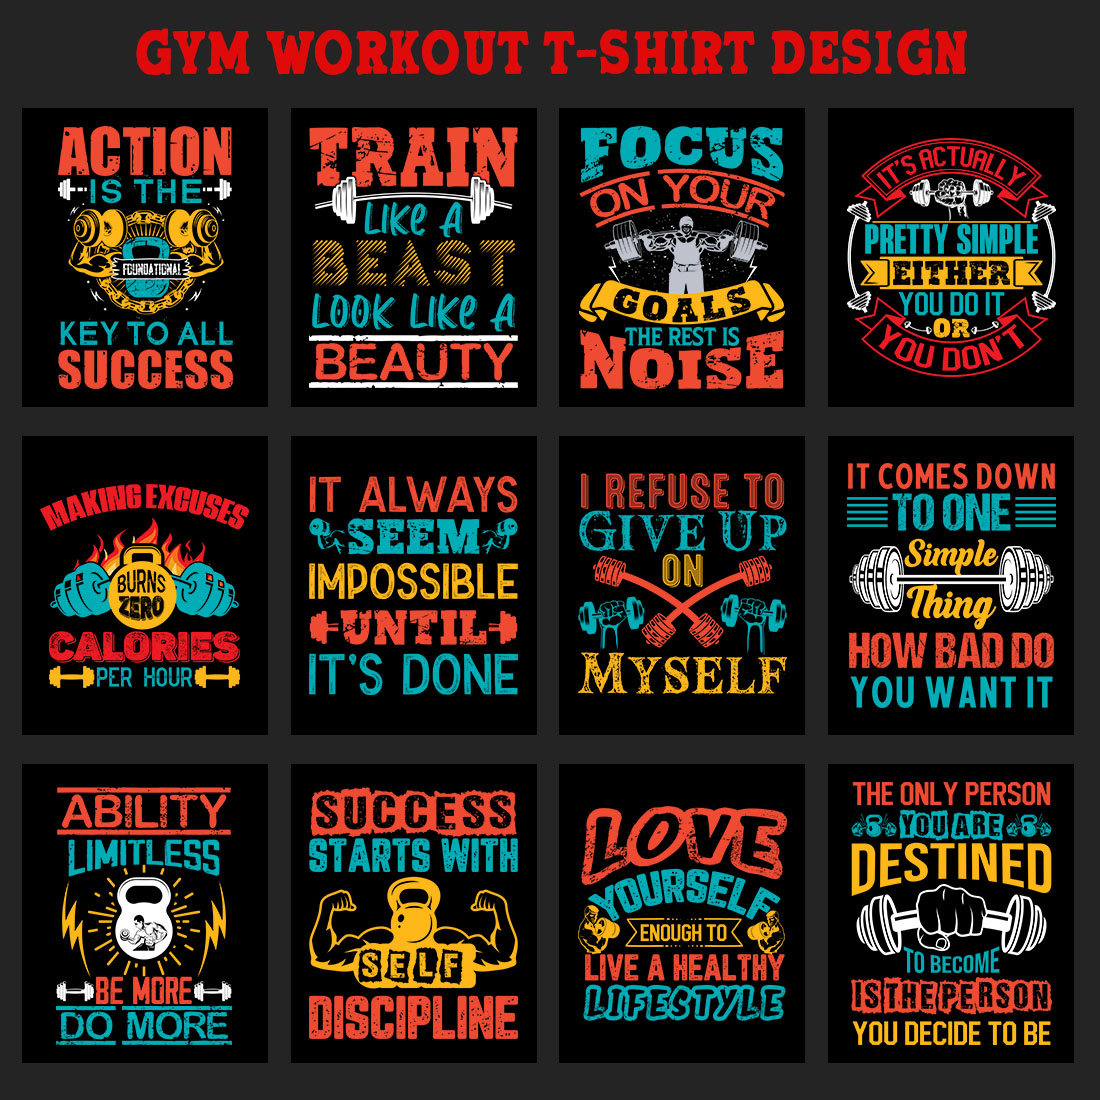 Gym Workout T-shirt Design cover image.